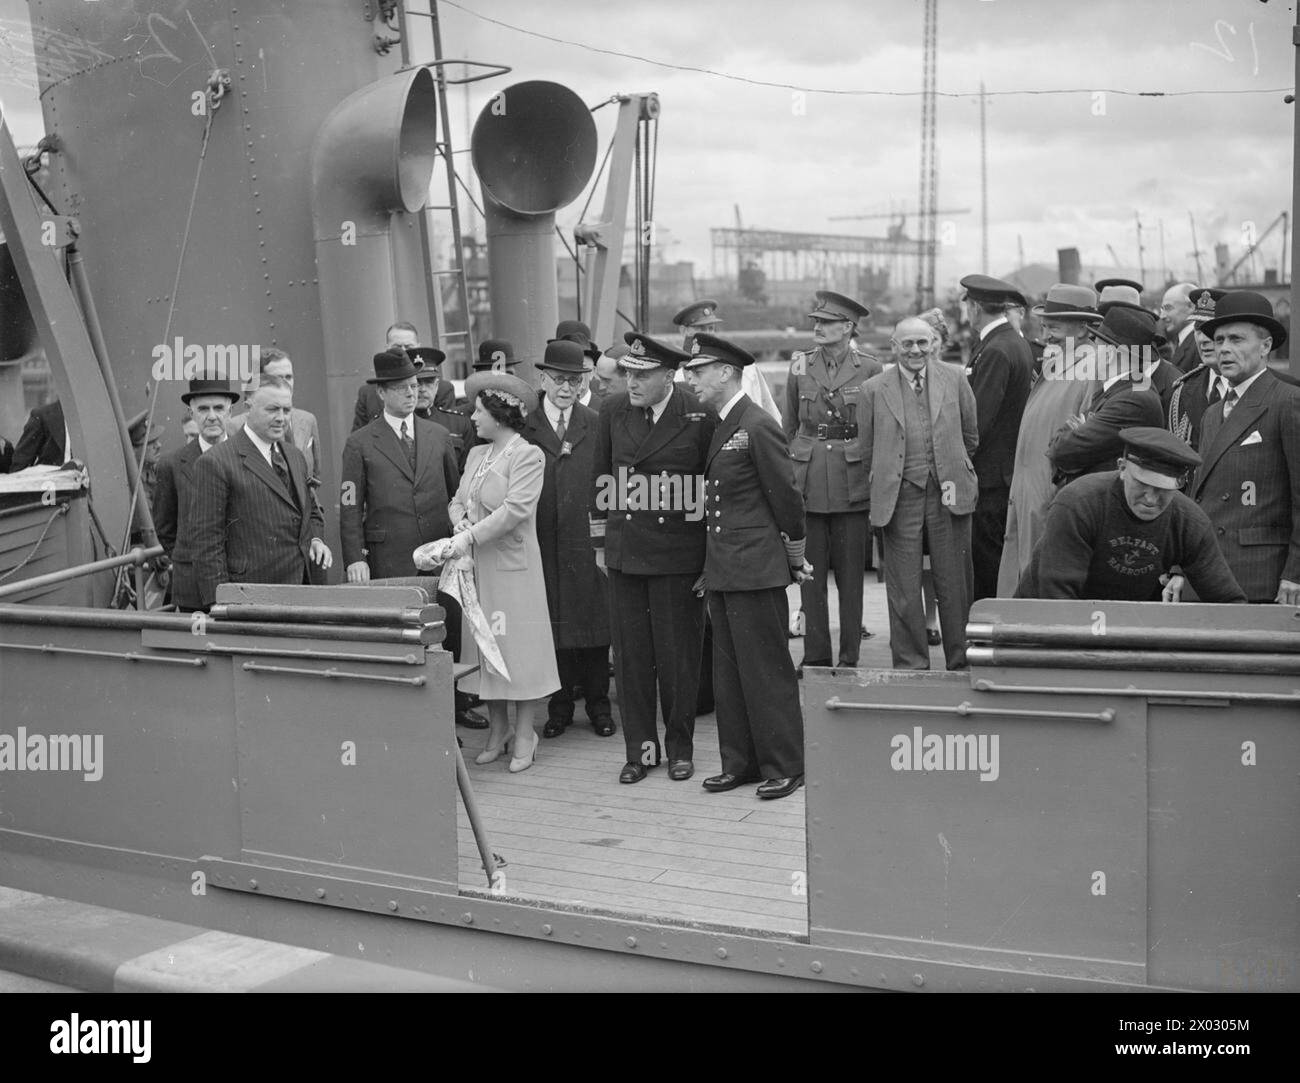 THE KING AND QUEEN'S VISIT TO BELFAST ON HMS PHOEBE. 1942. - The King ...